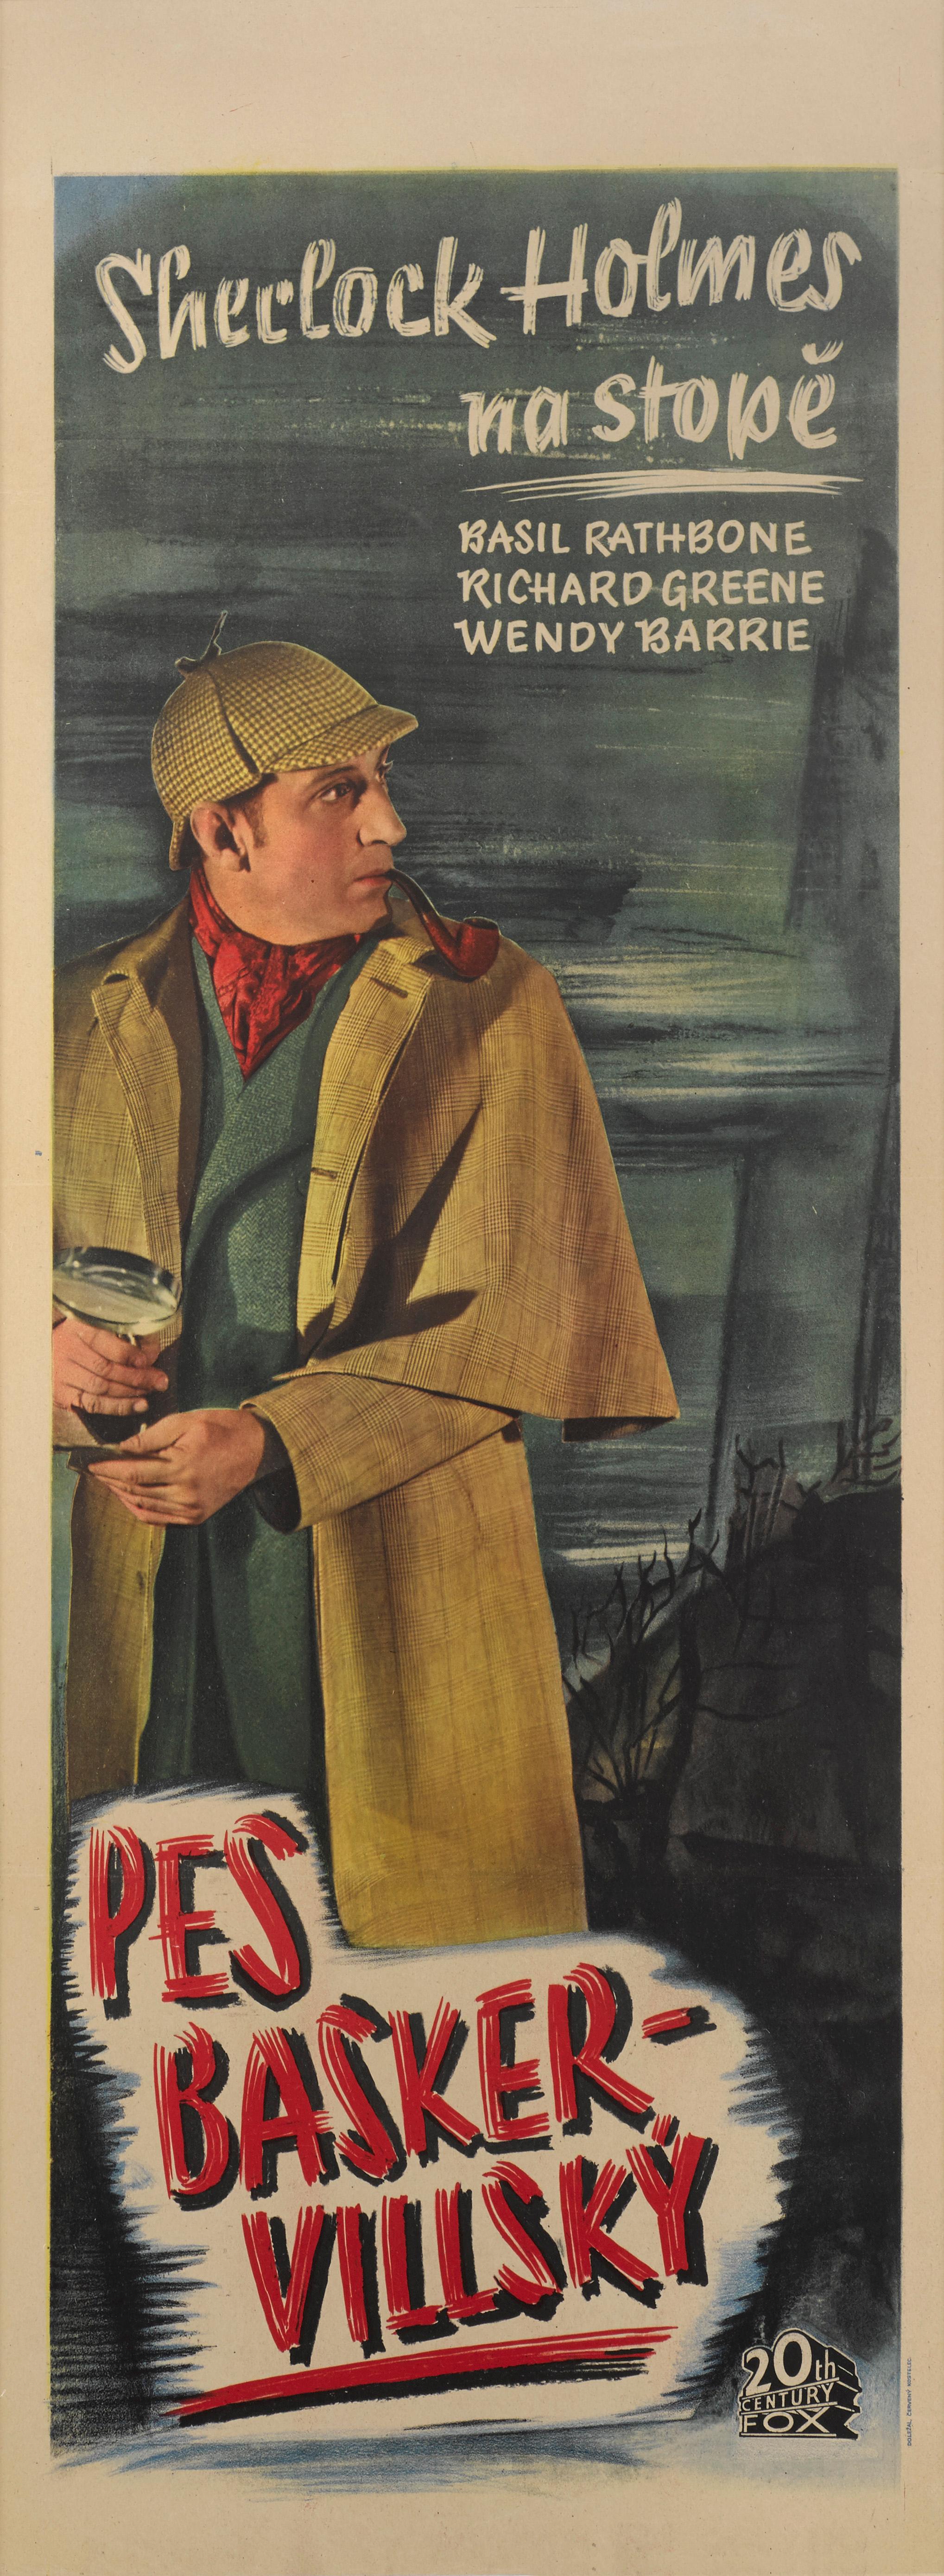 Original Czechoslovakian film poster.
This Artwork is unique to the films Czechoslovakian release.
By 1894 Sir Arthur Conan Doyle had enjoyed great success with his Sherlock Holmes stories. The eccentric detective had become a much-loved